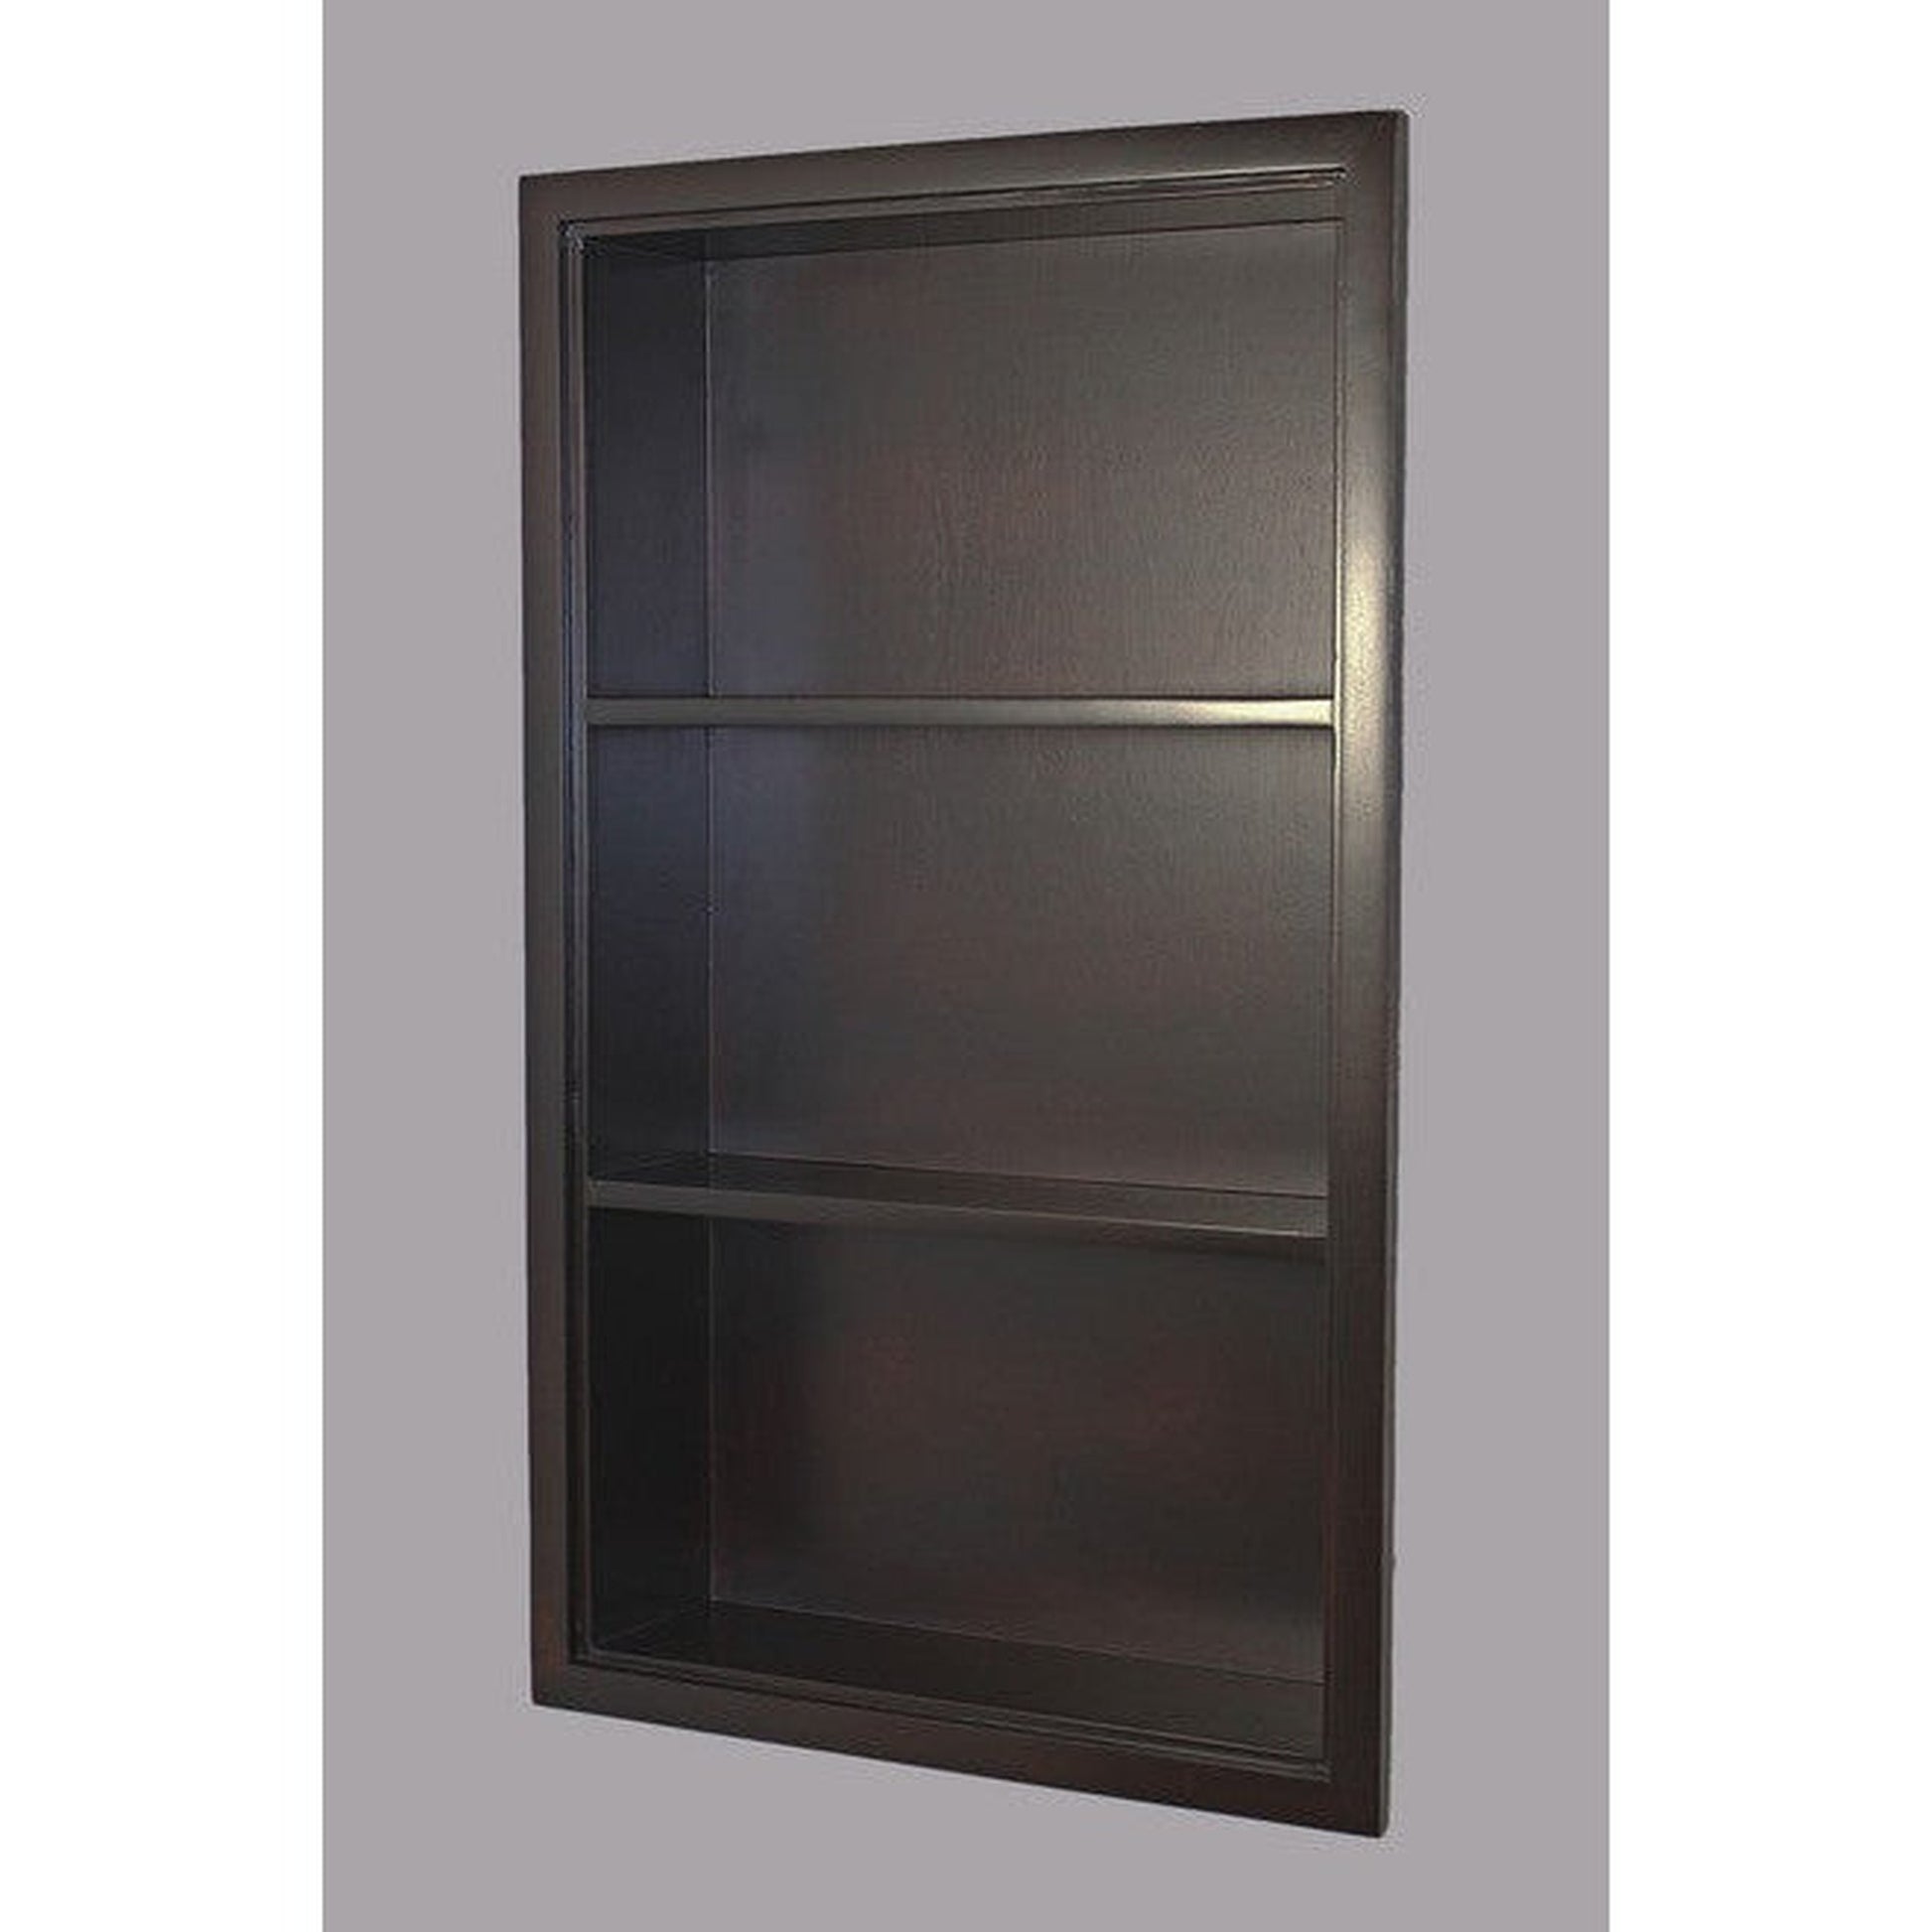 Fox Hollow Furnishings Aiden 14" x 24" Dark Brown Recessed Sloane Wall Niche With Plain Back